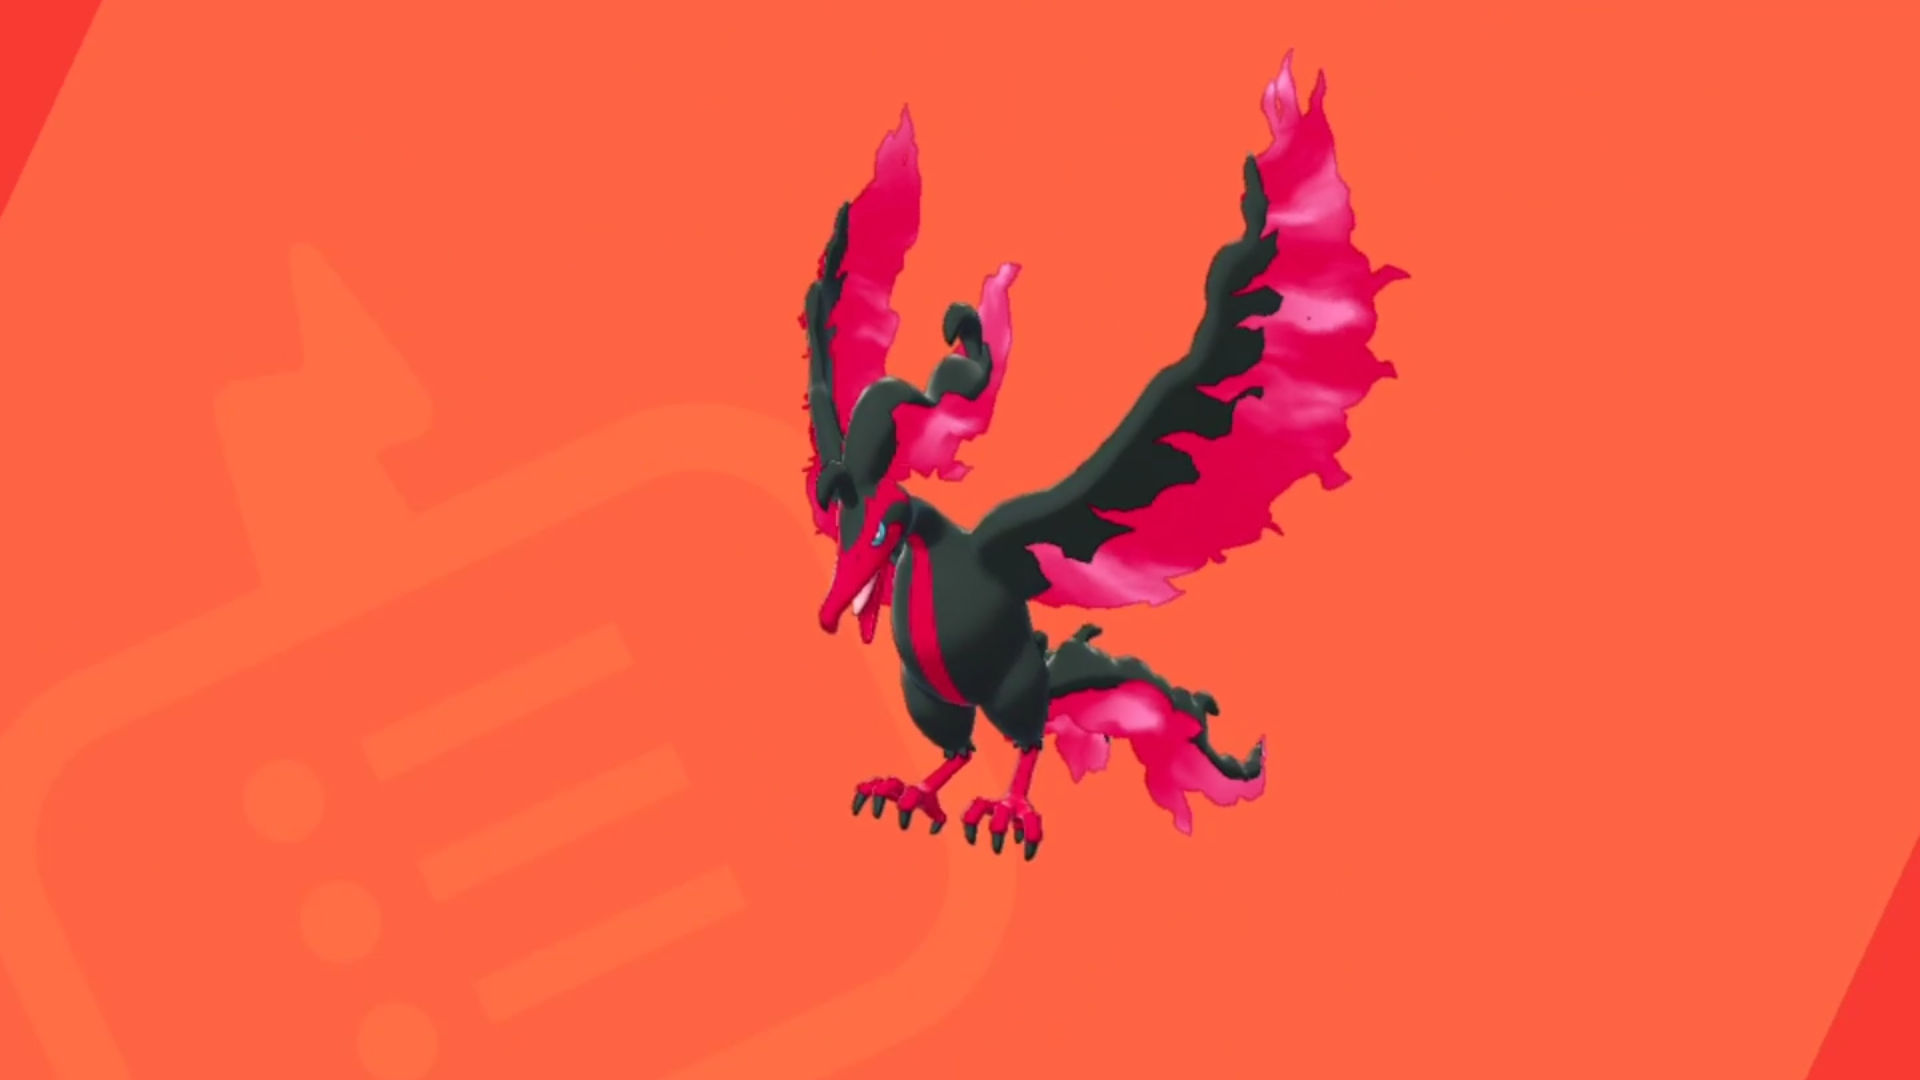 How to get SHINY GALARIAN MOLTRES in Pokémon Sword/Shield • Event